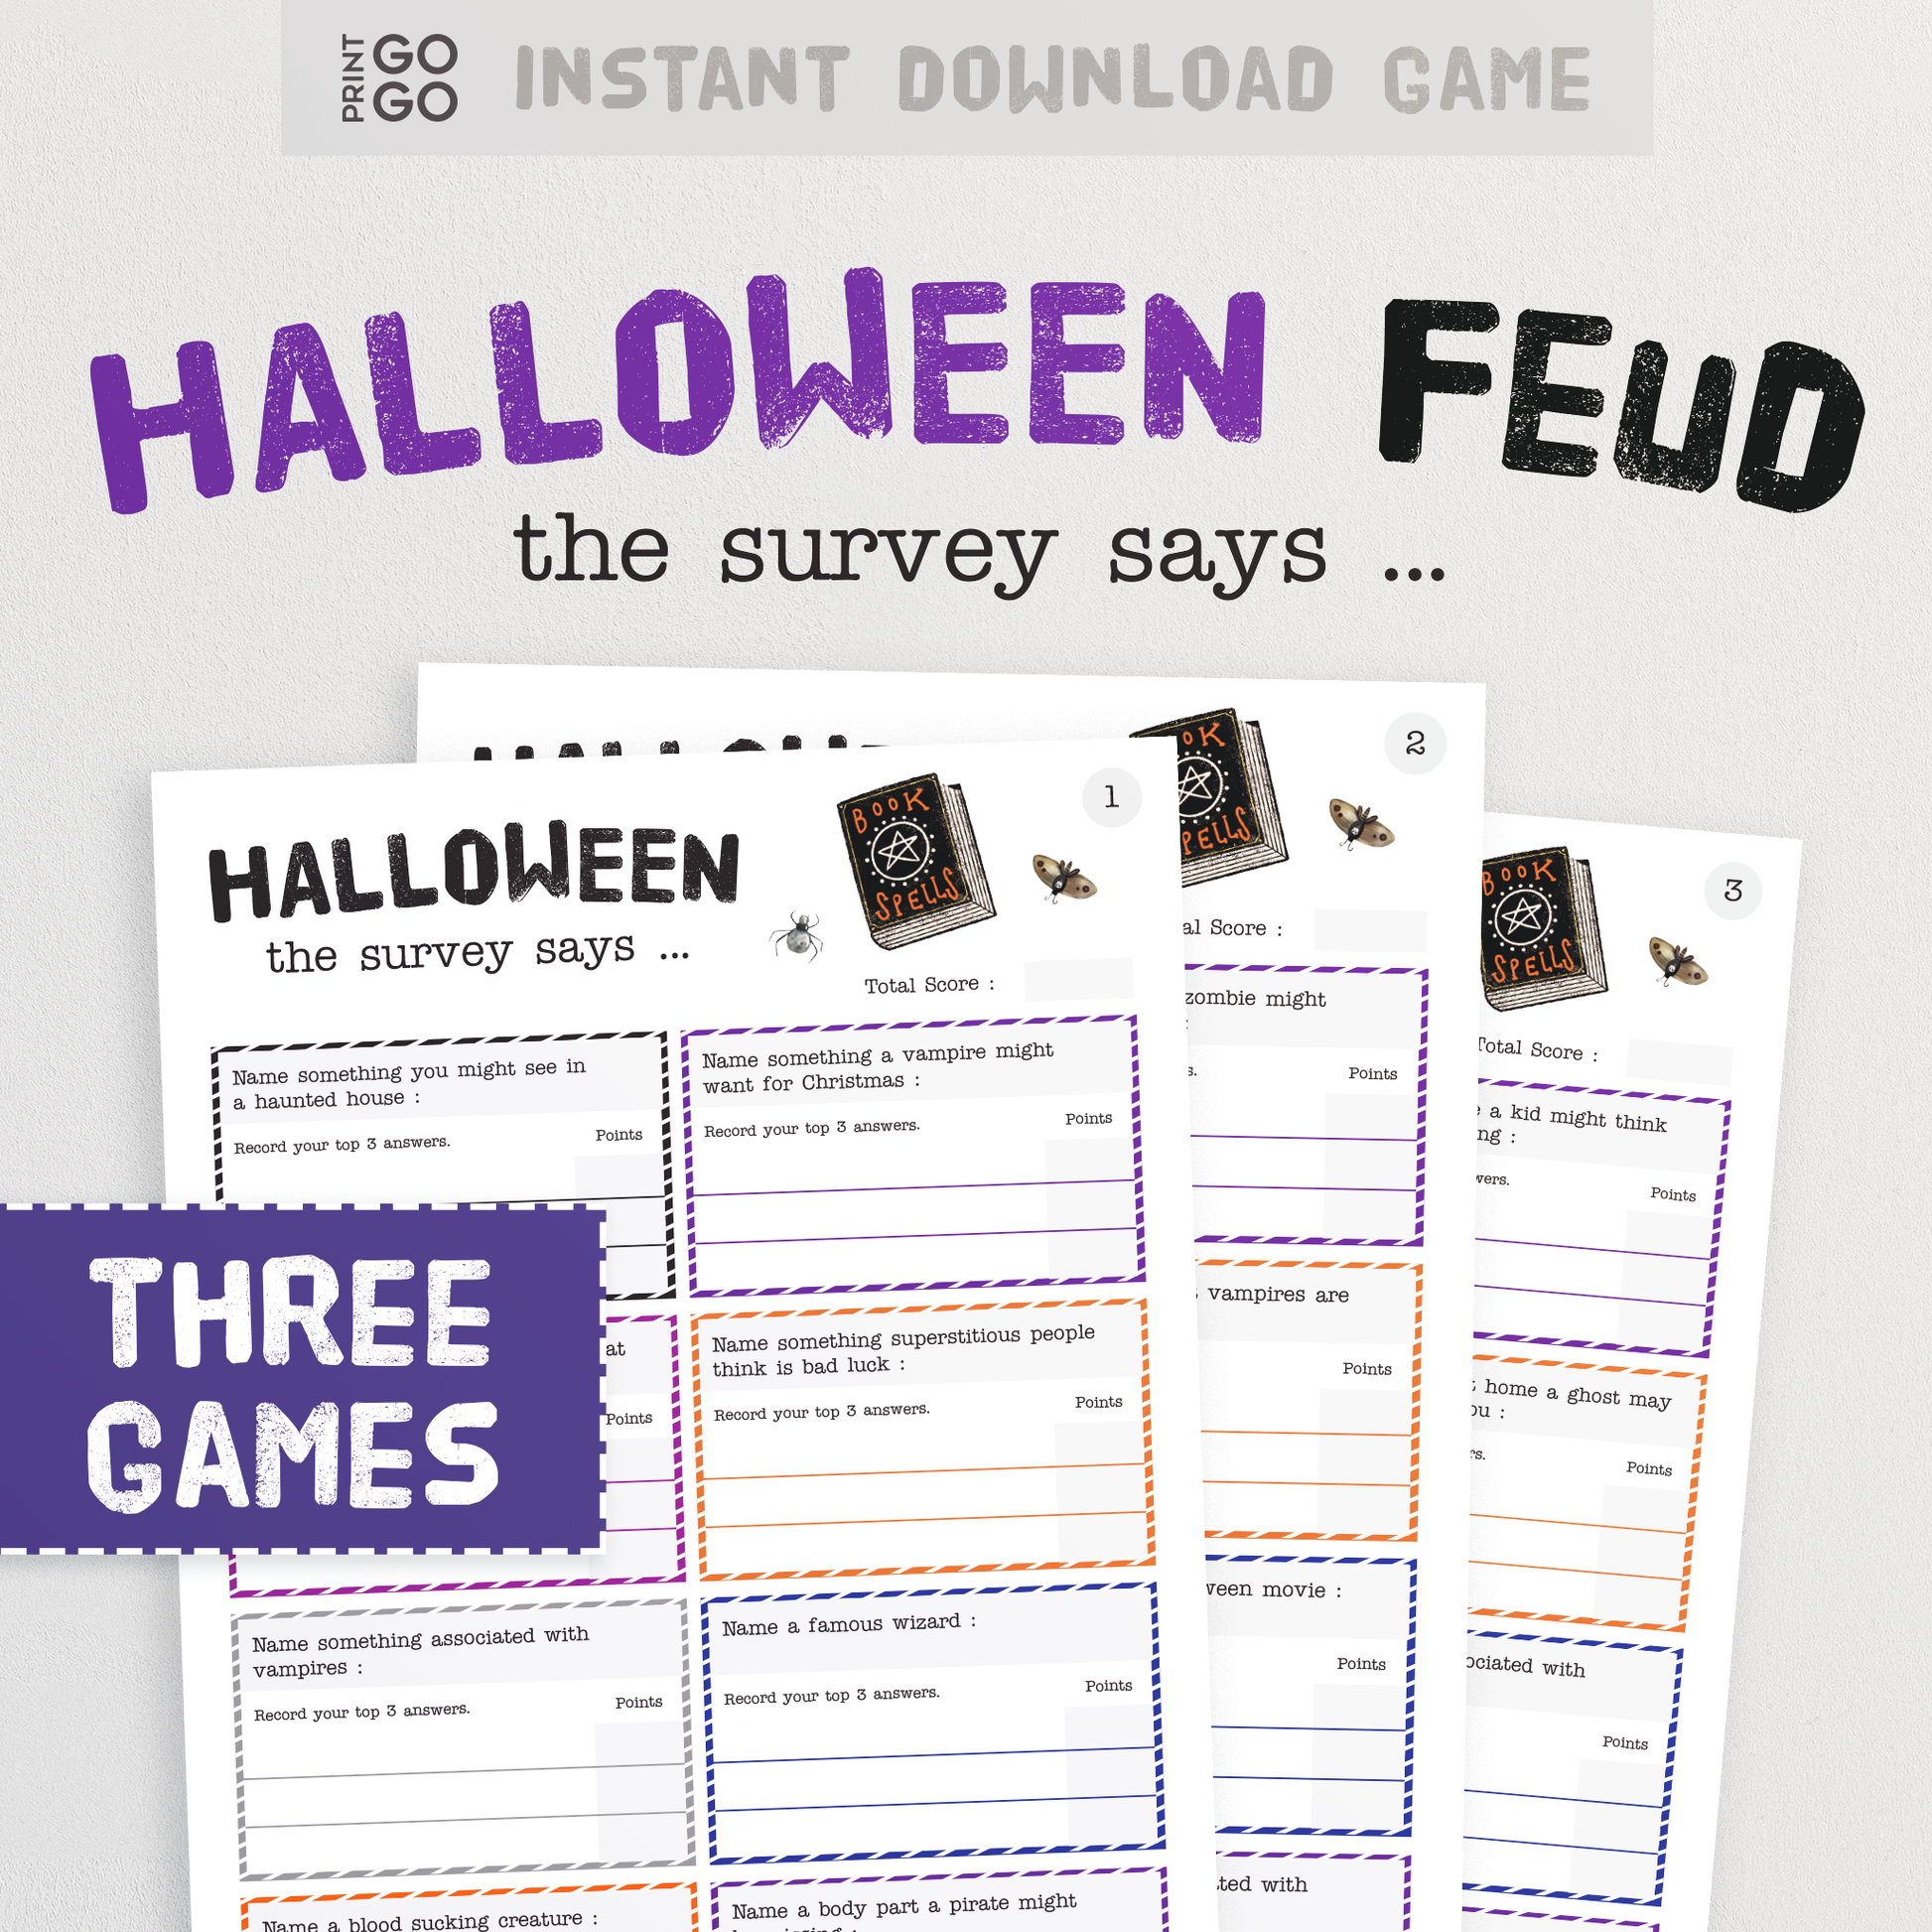 Halloween The Survey Says - The Fun Game of Matching Answers and Scoring Points